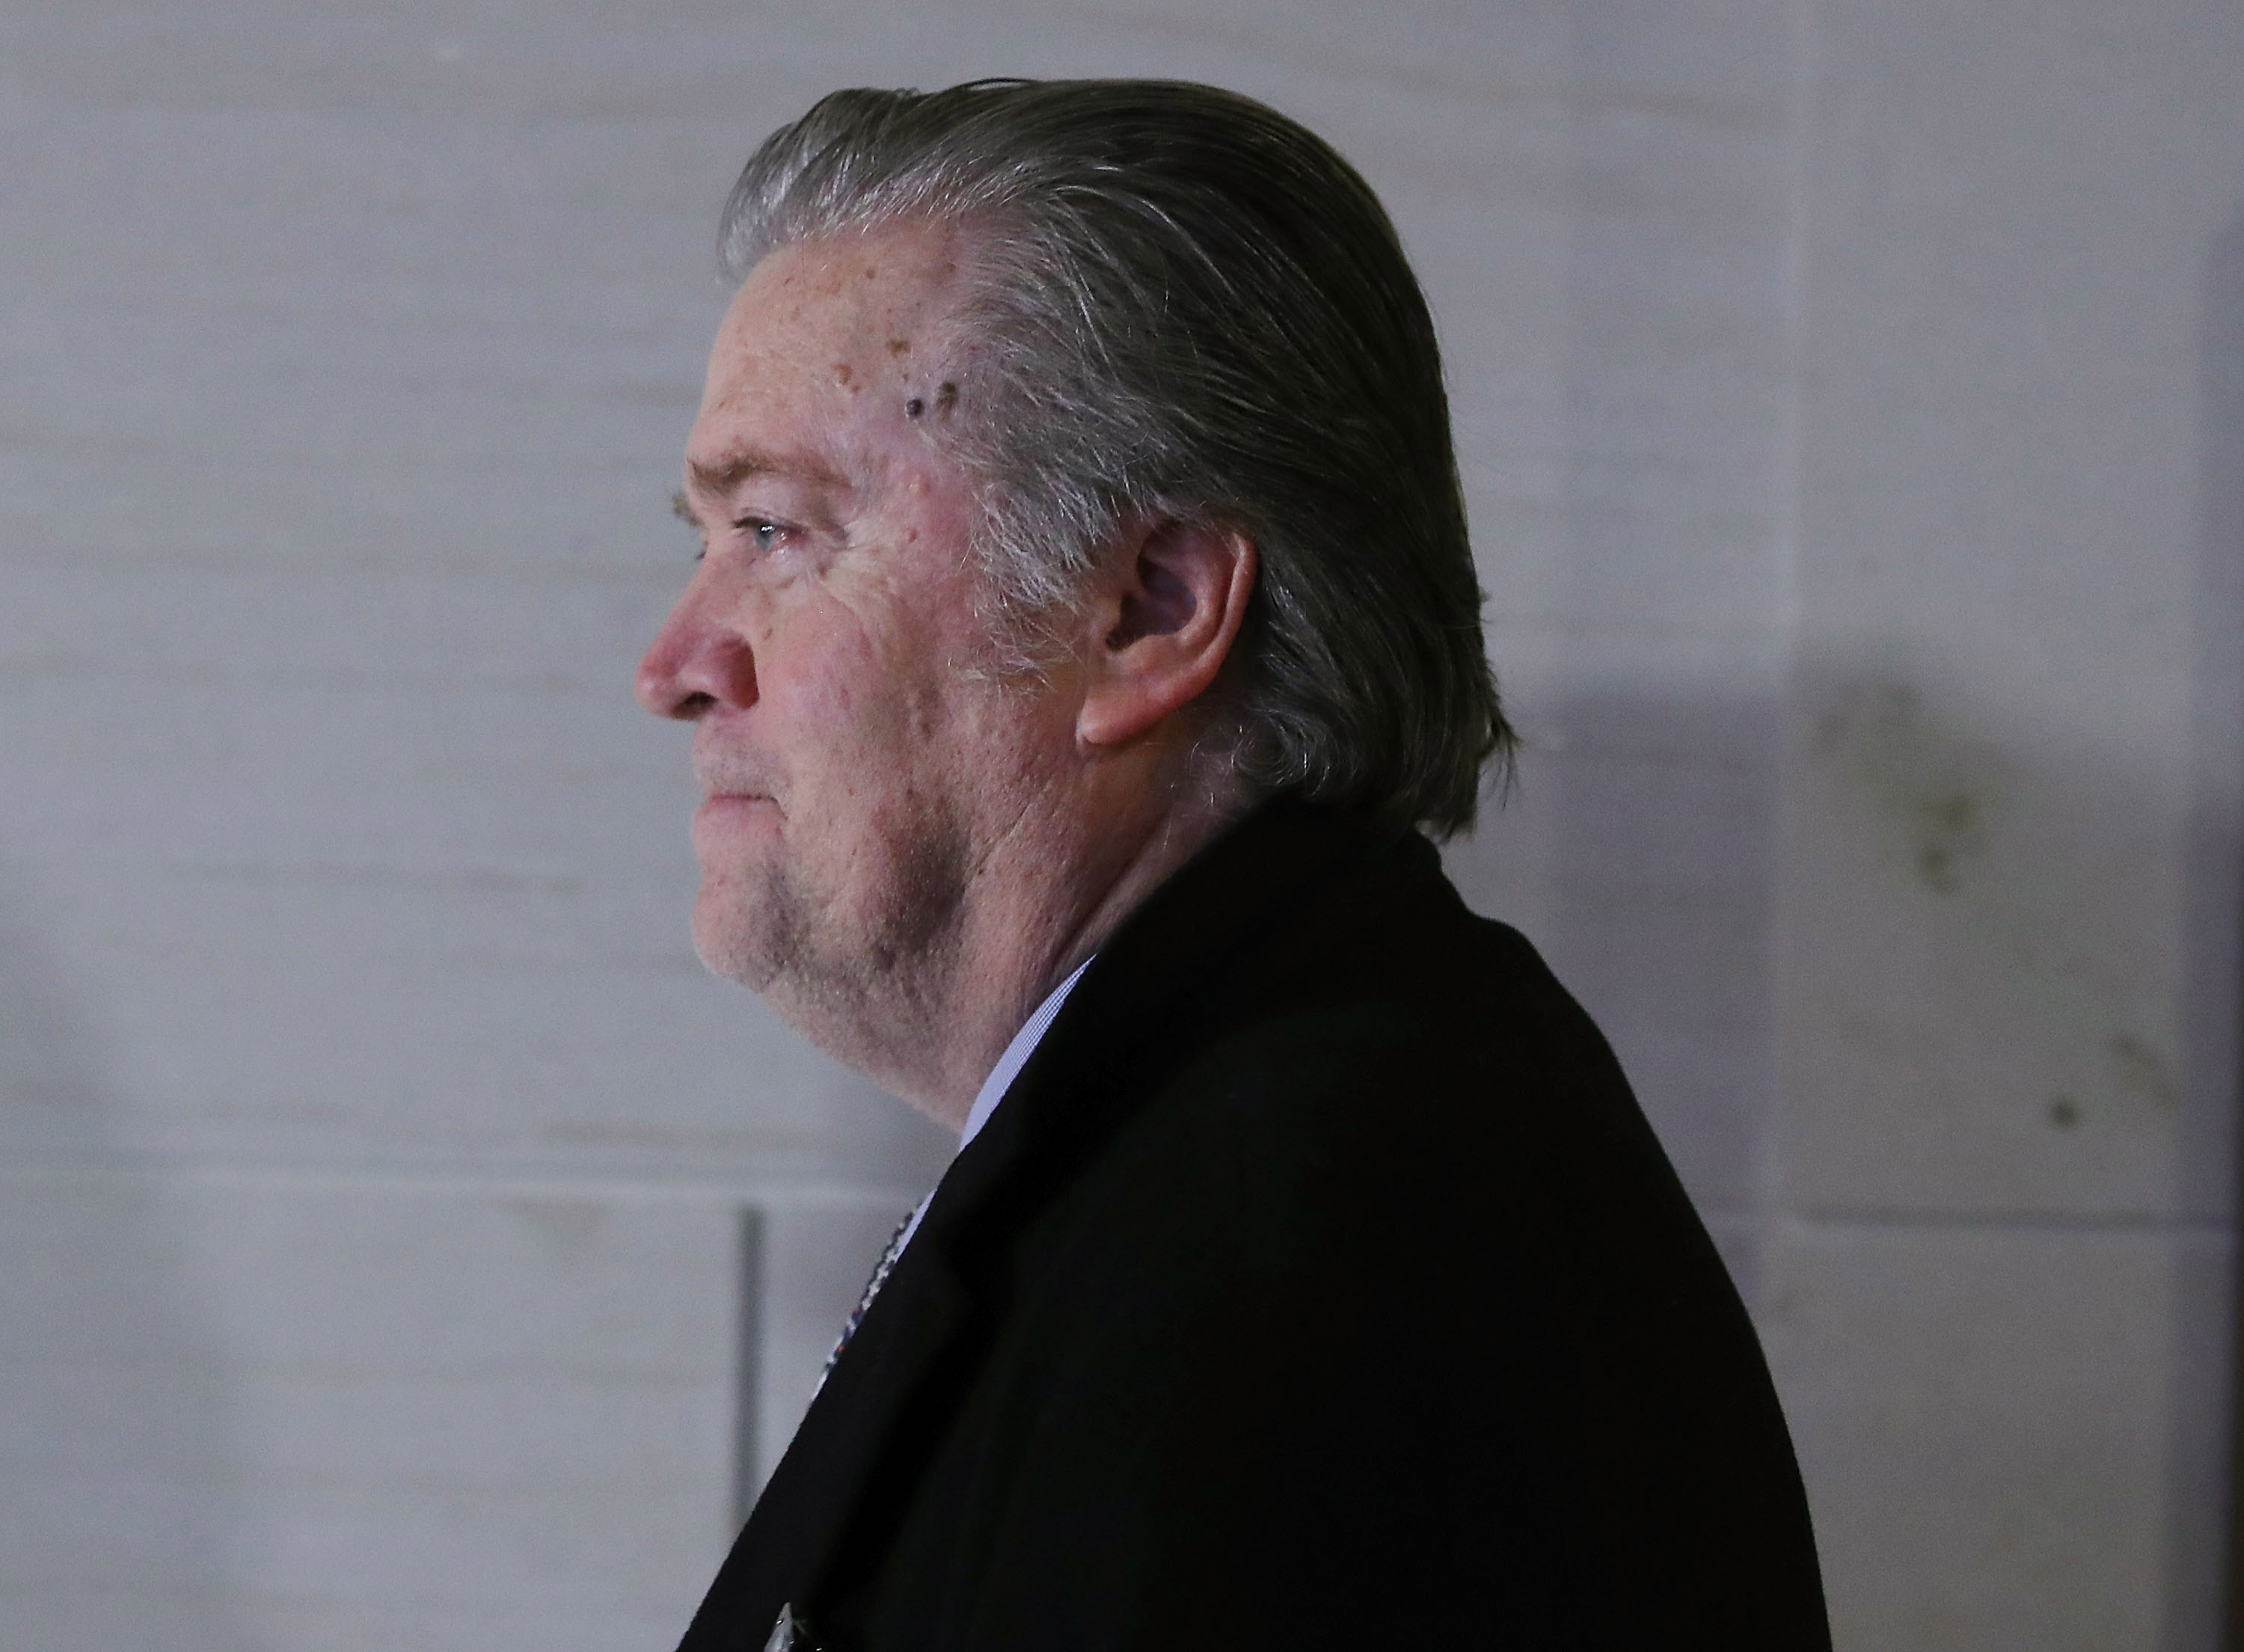 Steve Bannon, former advisor to President Trump, arrives at a House Intelligence Committee closed door meeting, on January 16, 2018 in Washington, DC.